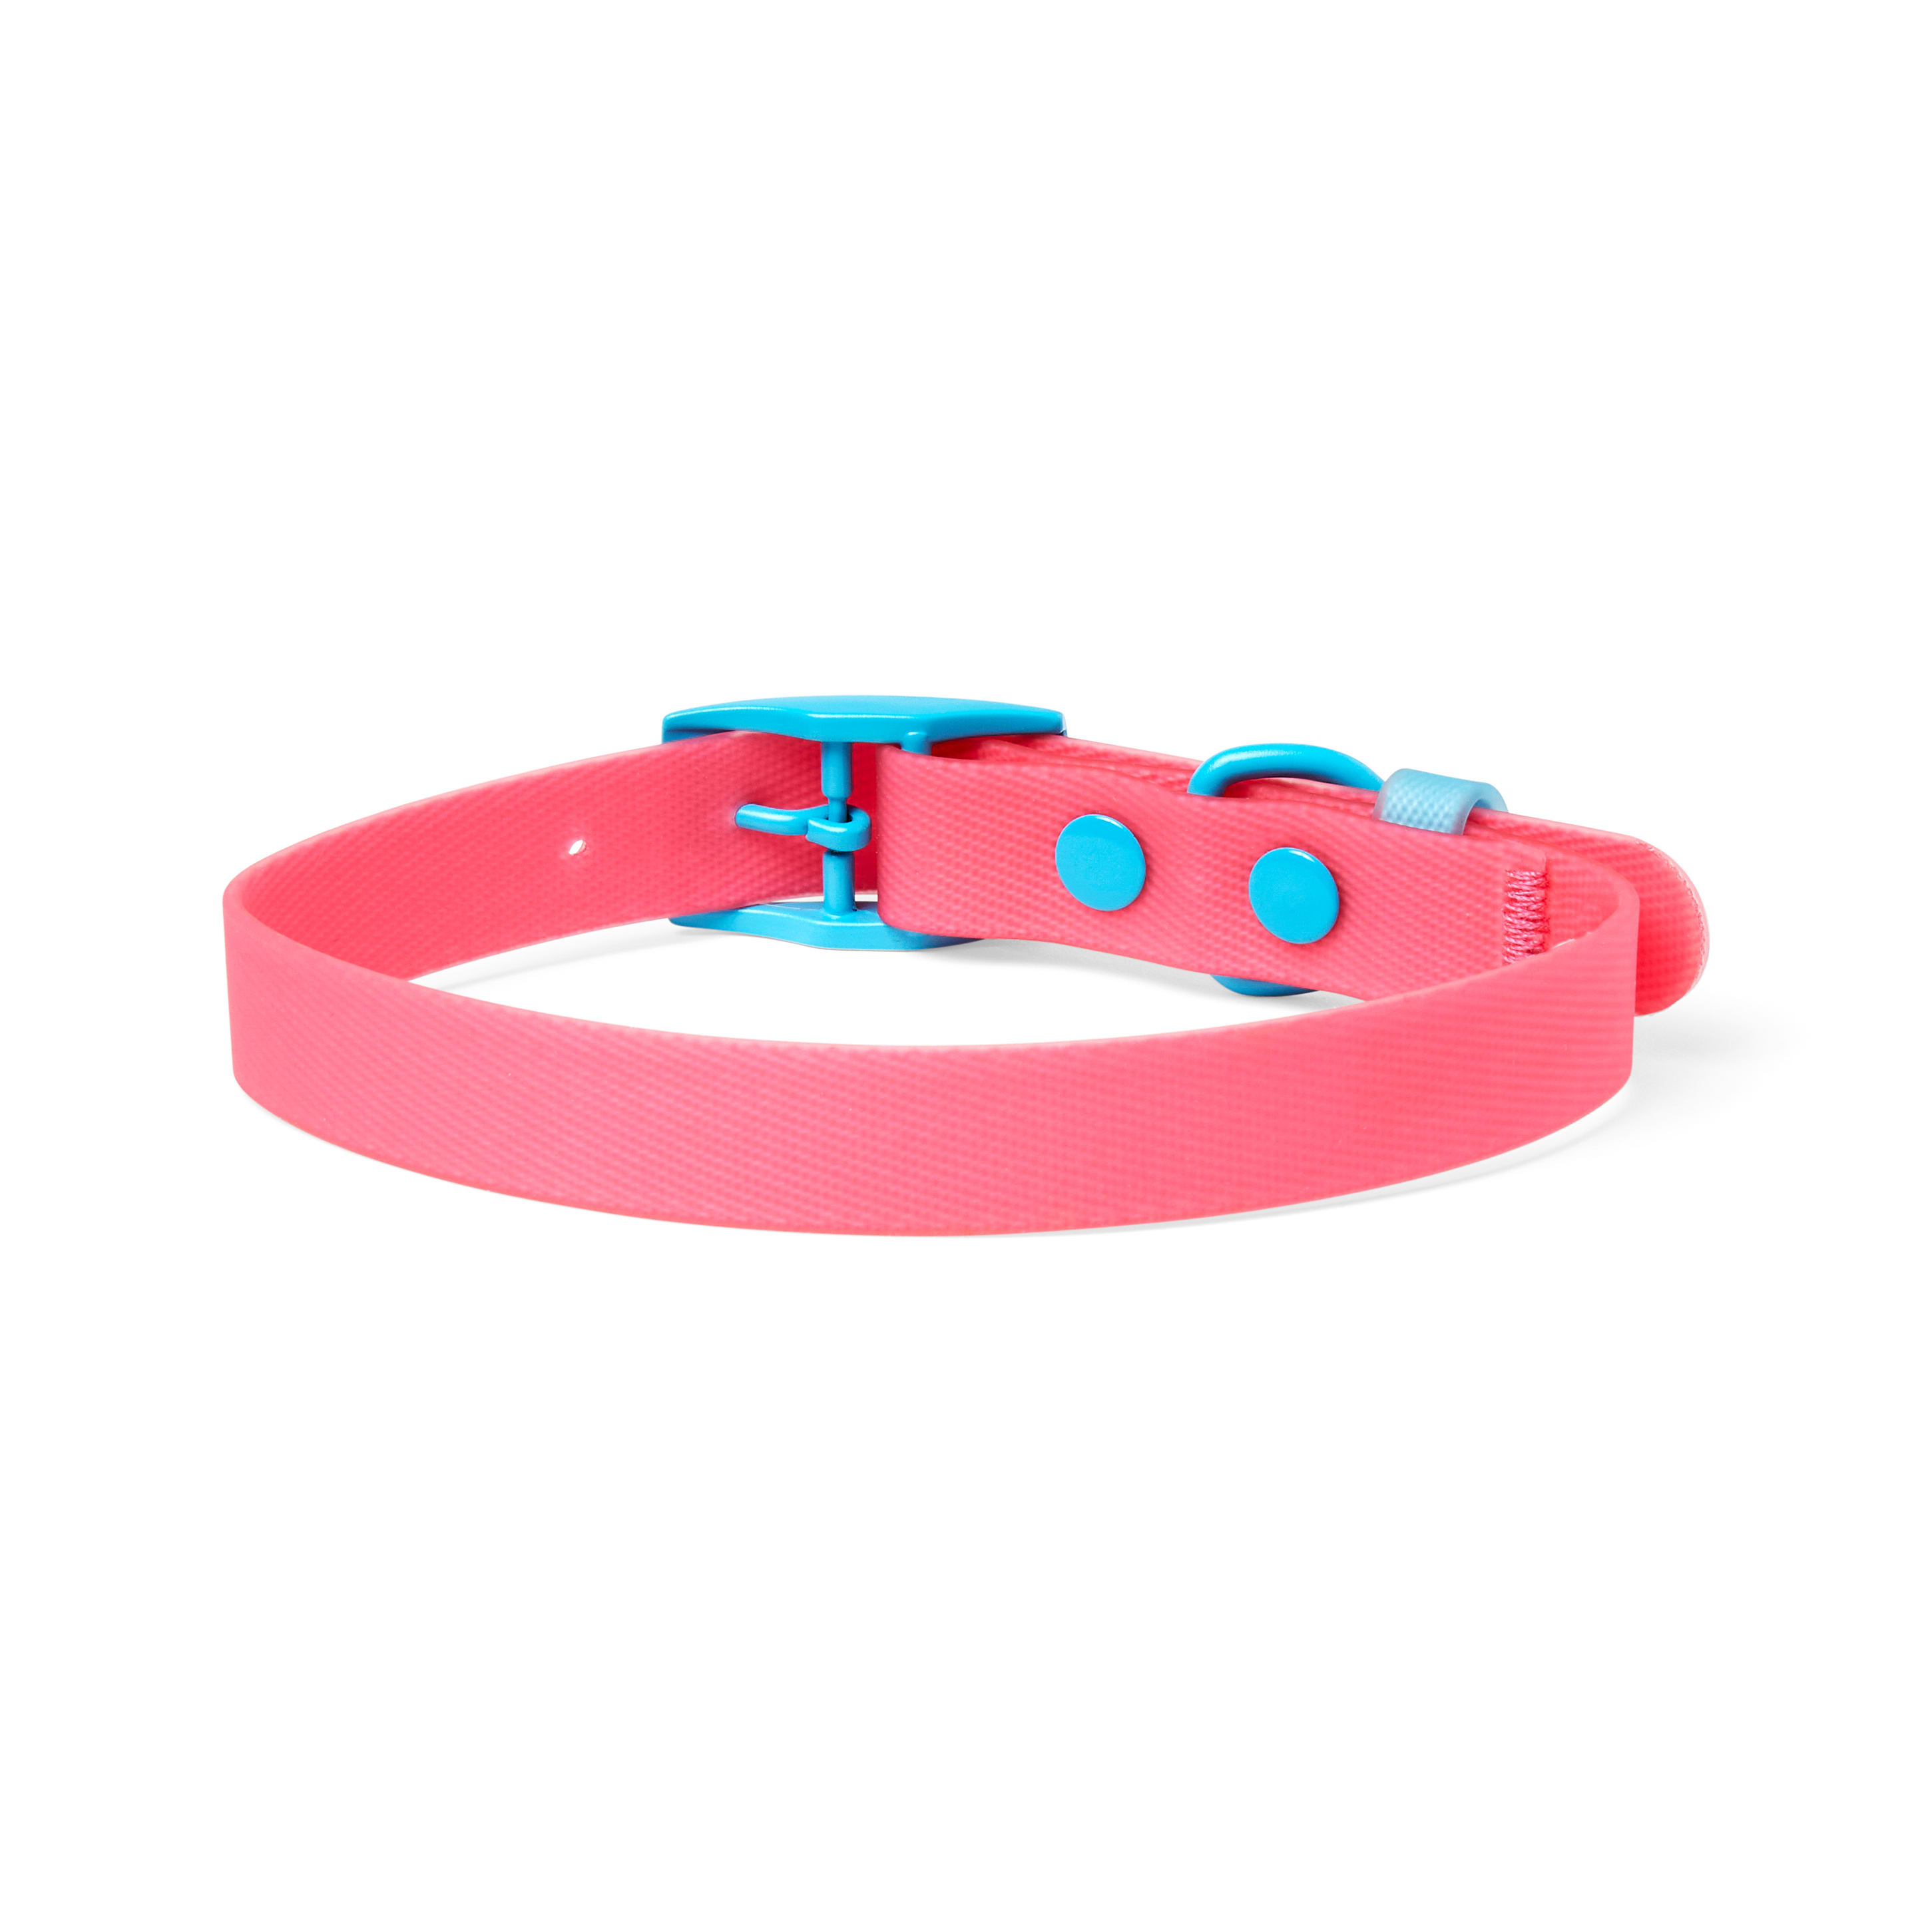 YOULY The Extrovert Water-Resistant Pink & Blue Colorblocked Dog Collar,  Small